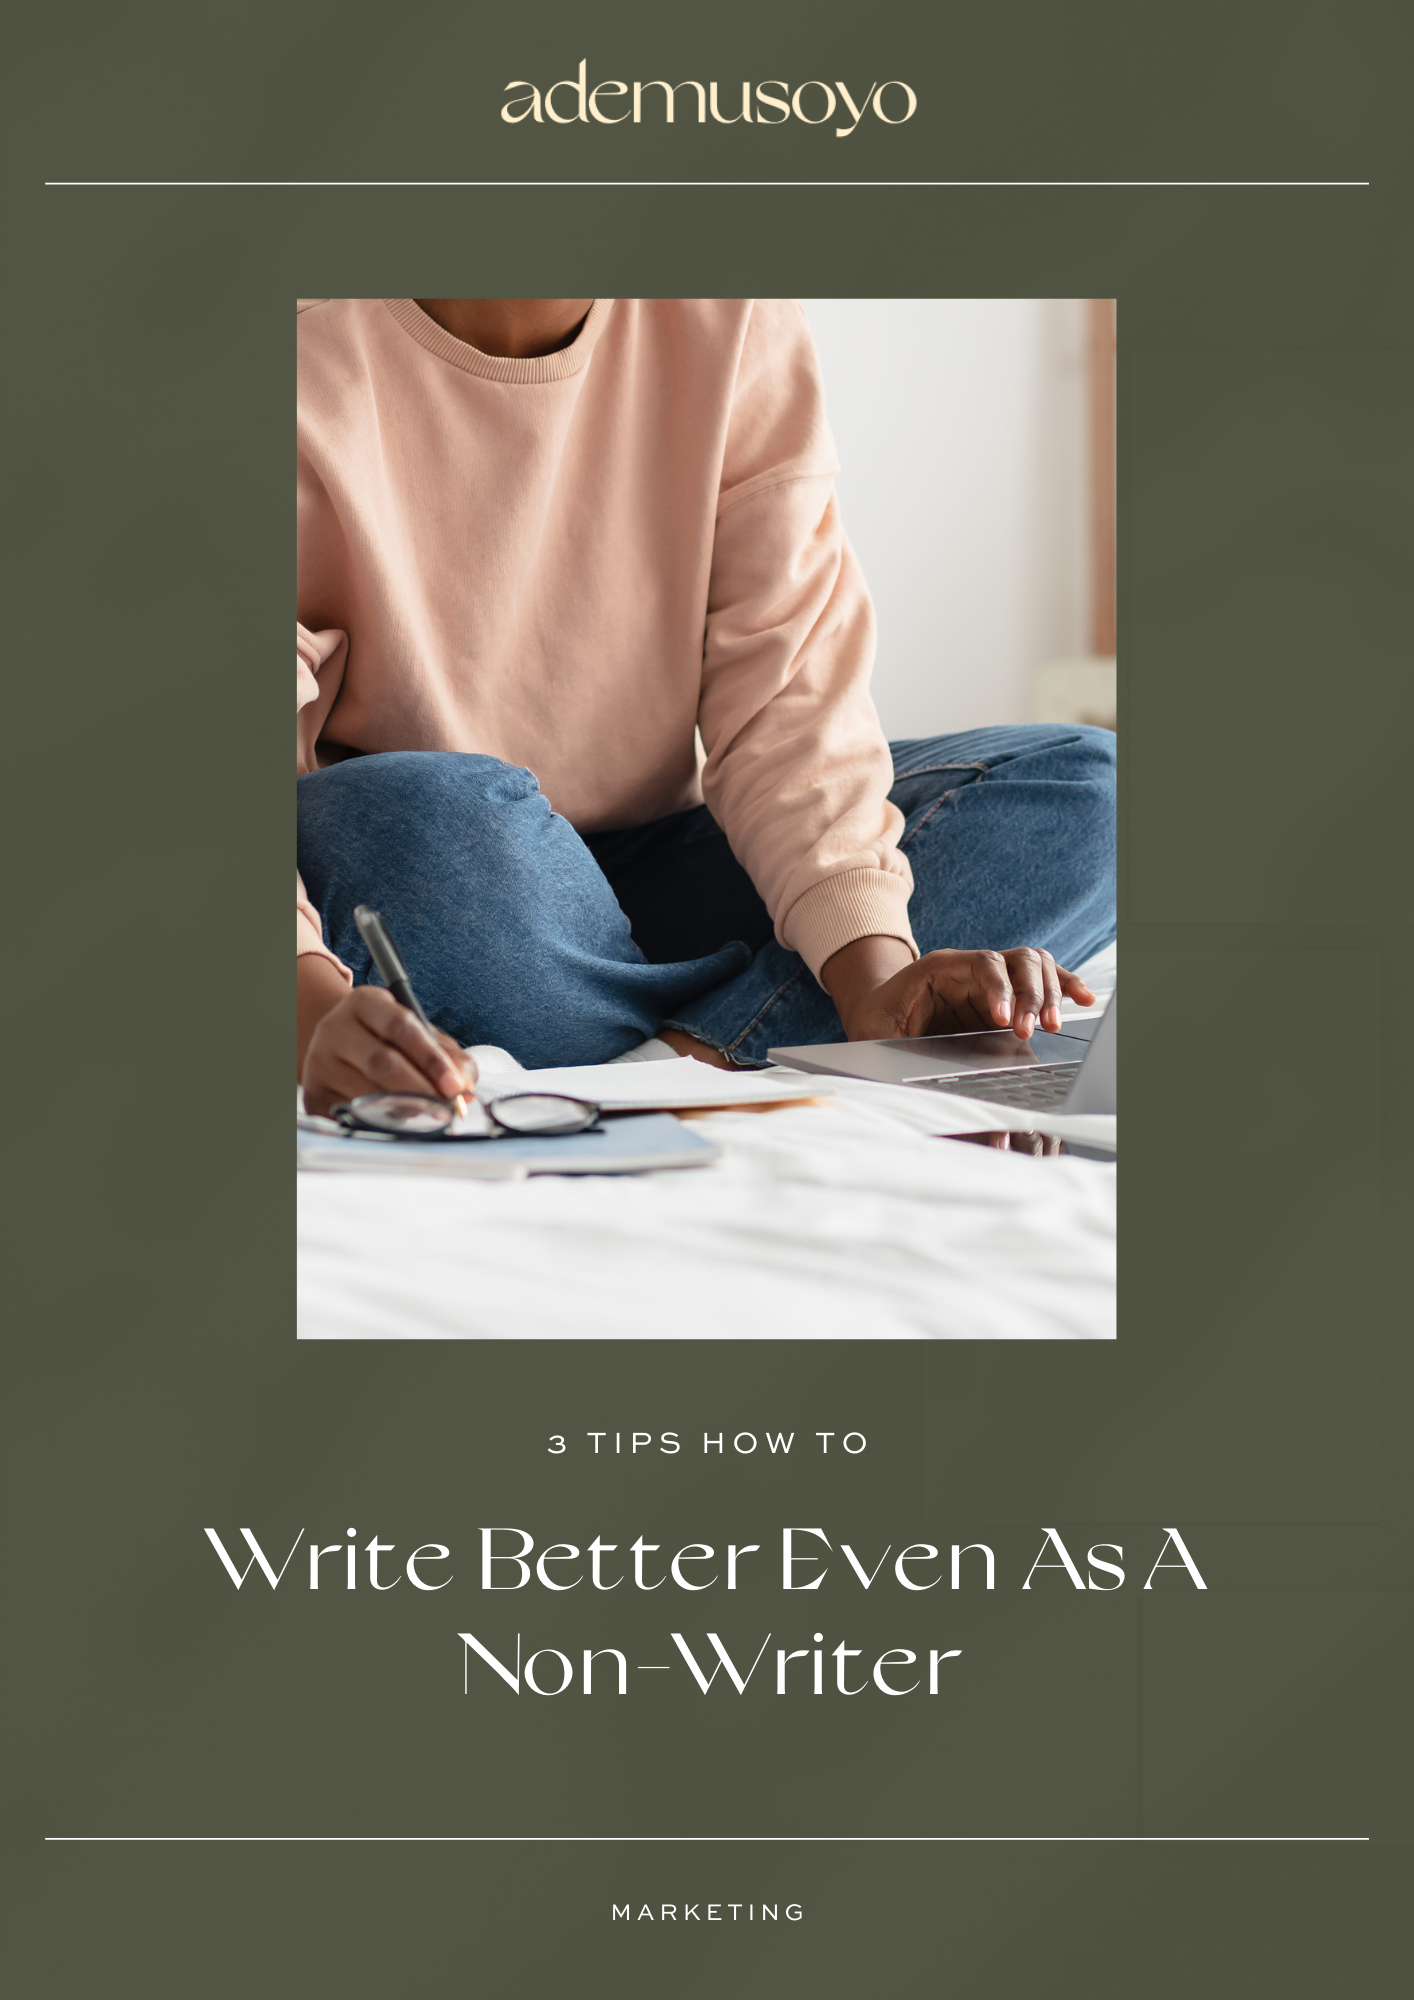 a blog cover mage for a blog post 3 tips how to write better even a a non-writer where a woman in beige sweater sitting n her bed is writing on her notebook while browsing on her laptop.